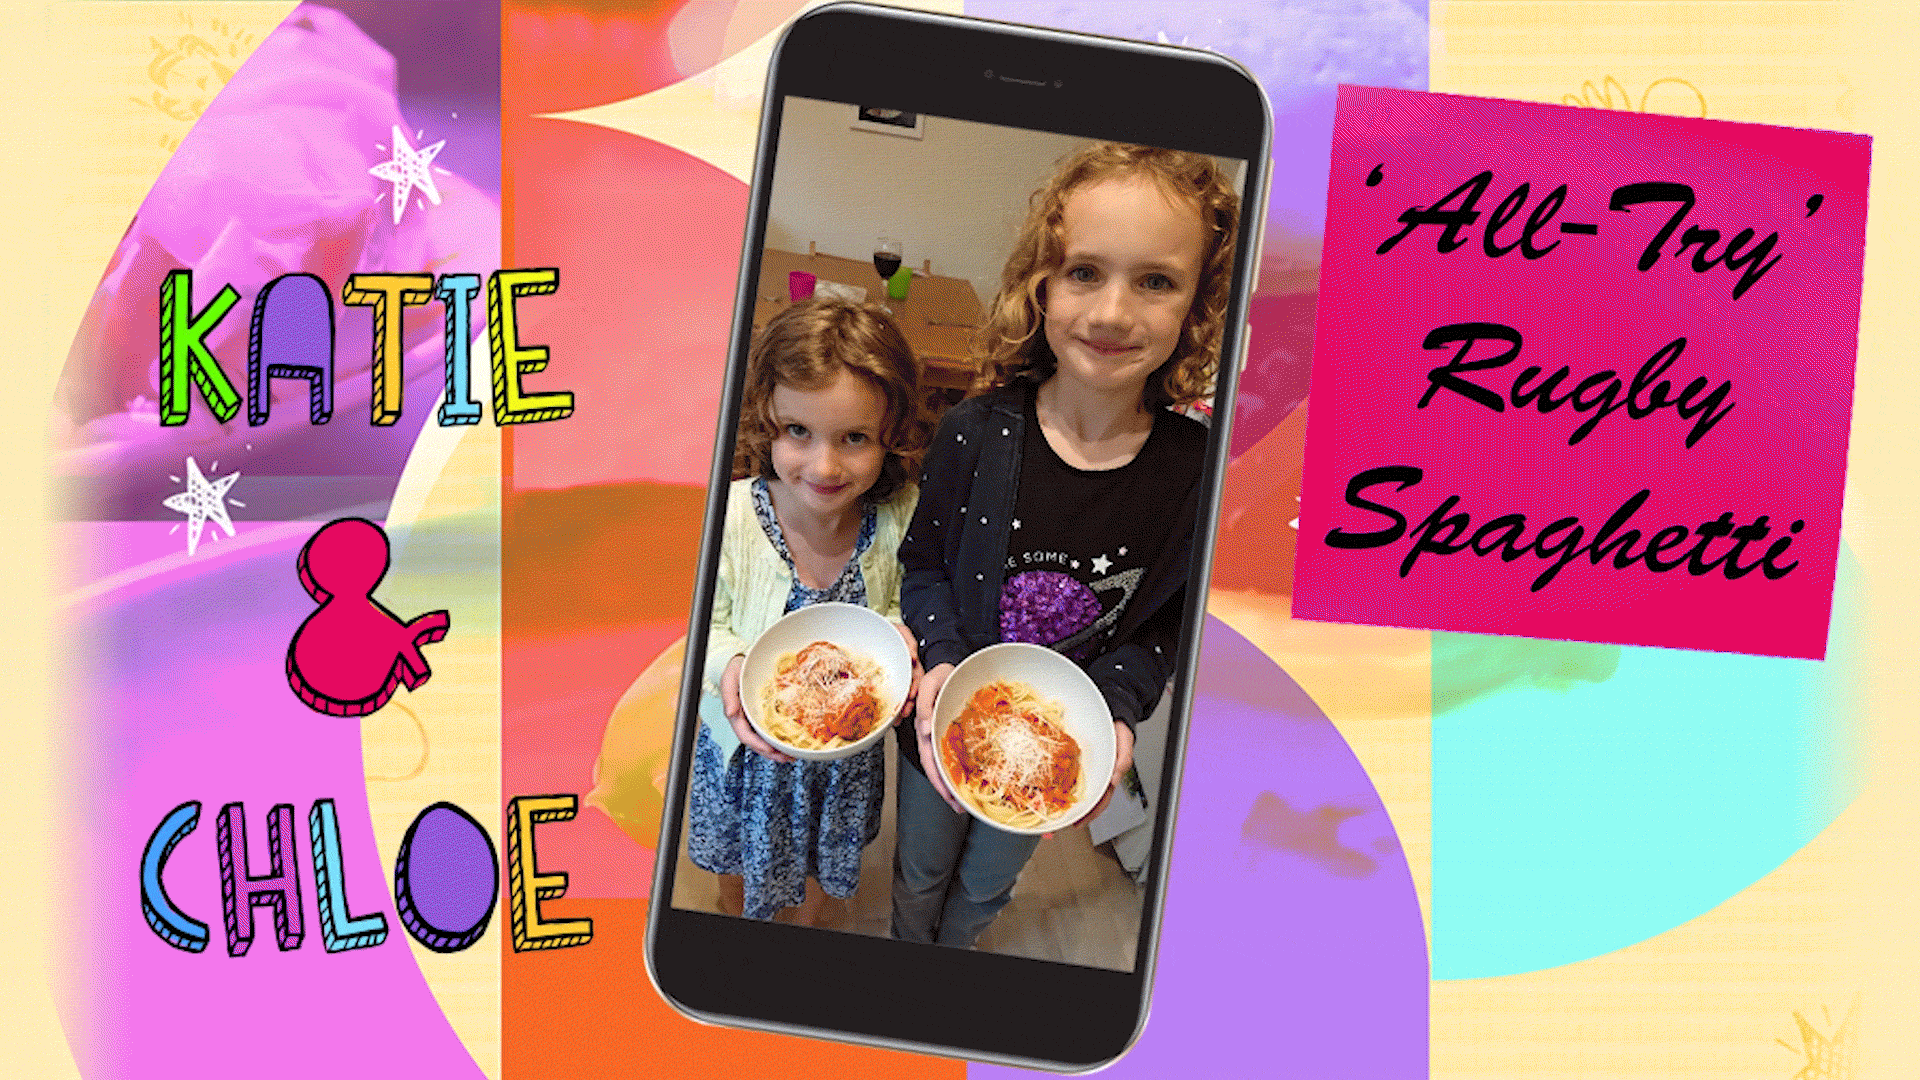 Two little girls (Katie and Chloe) are seen holding bowls of spaghetti, then the picture shows a little girl on her own (Katie) holding a tray of macarons then a sticky toffee pudding.